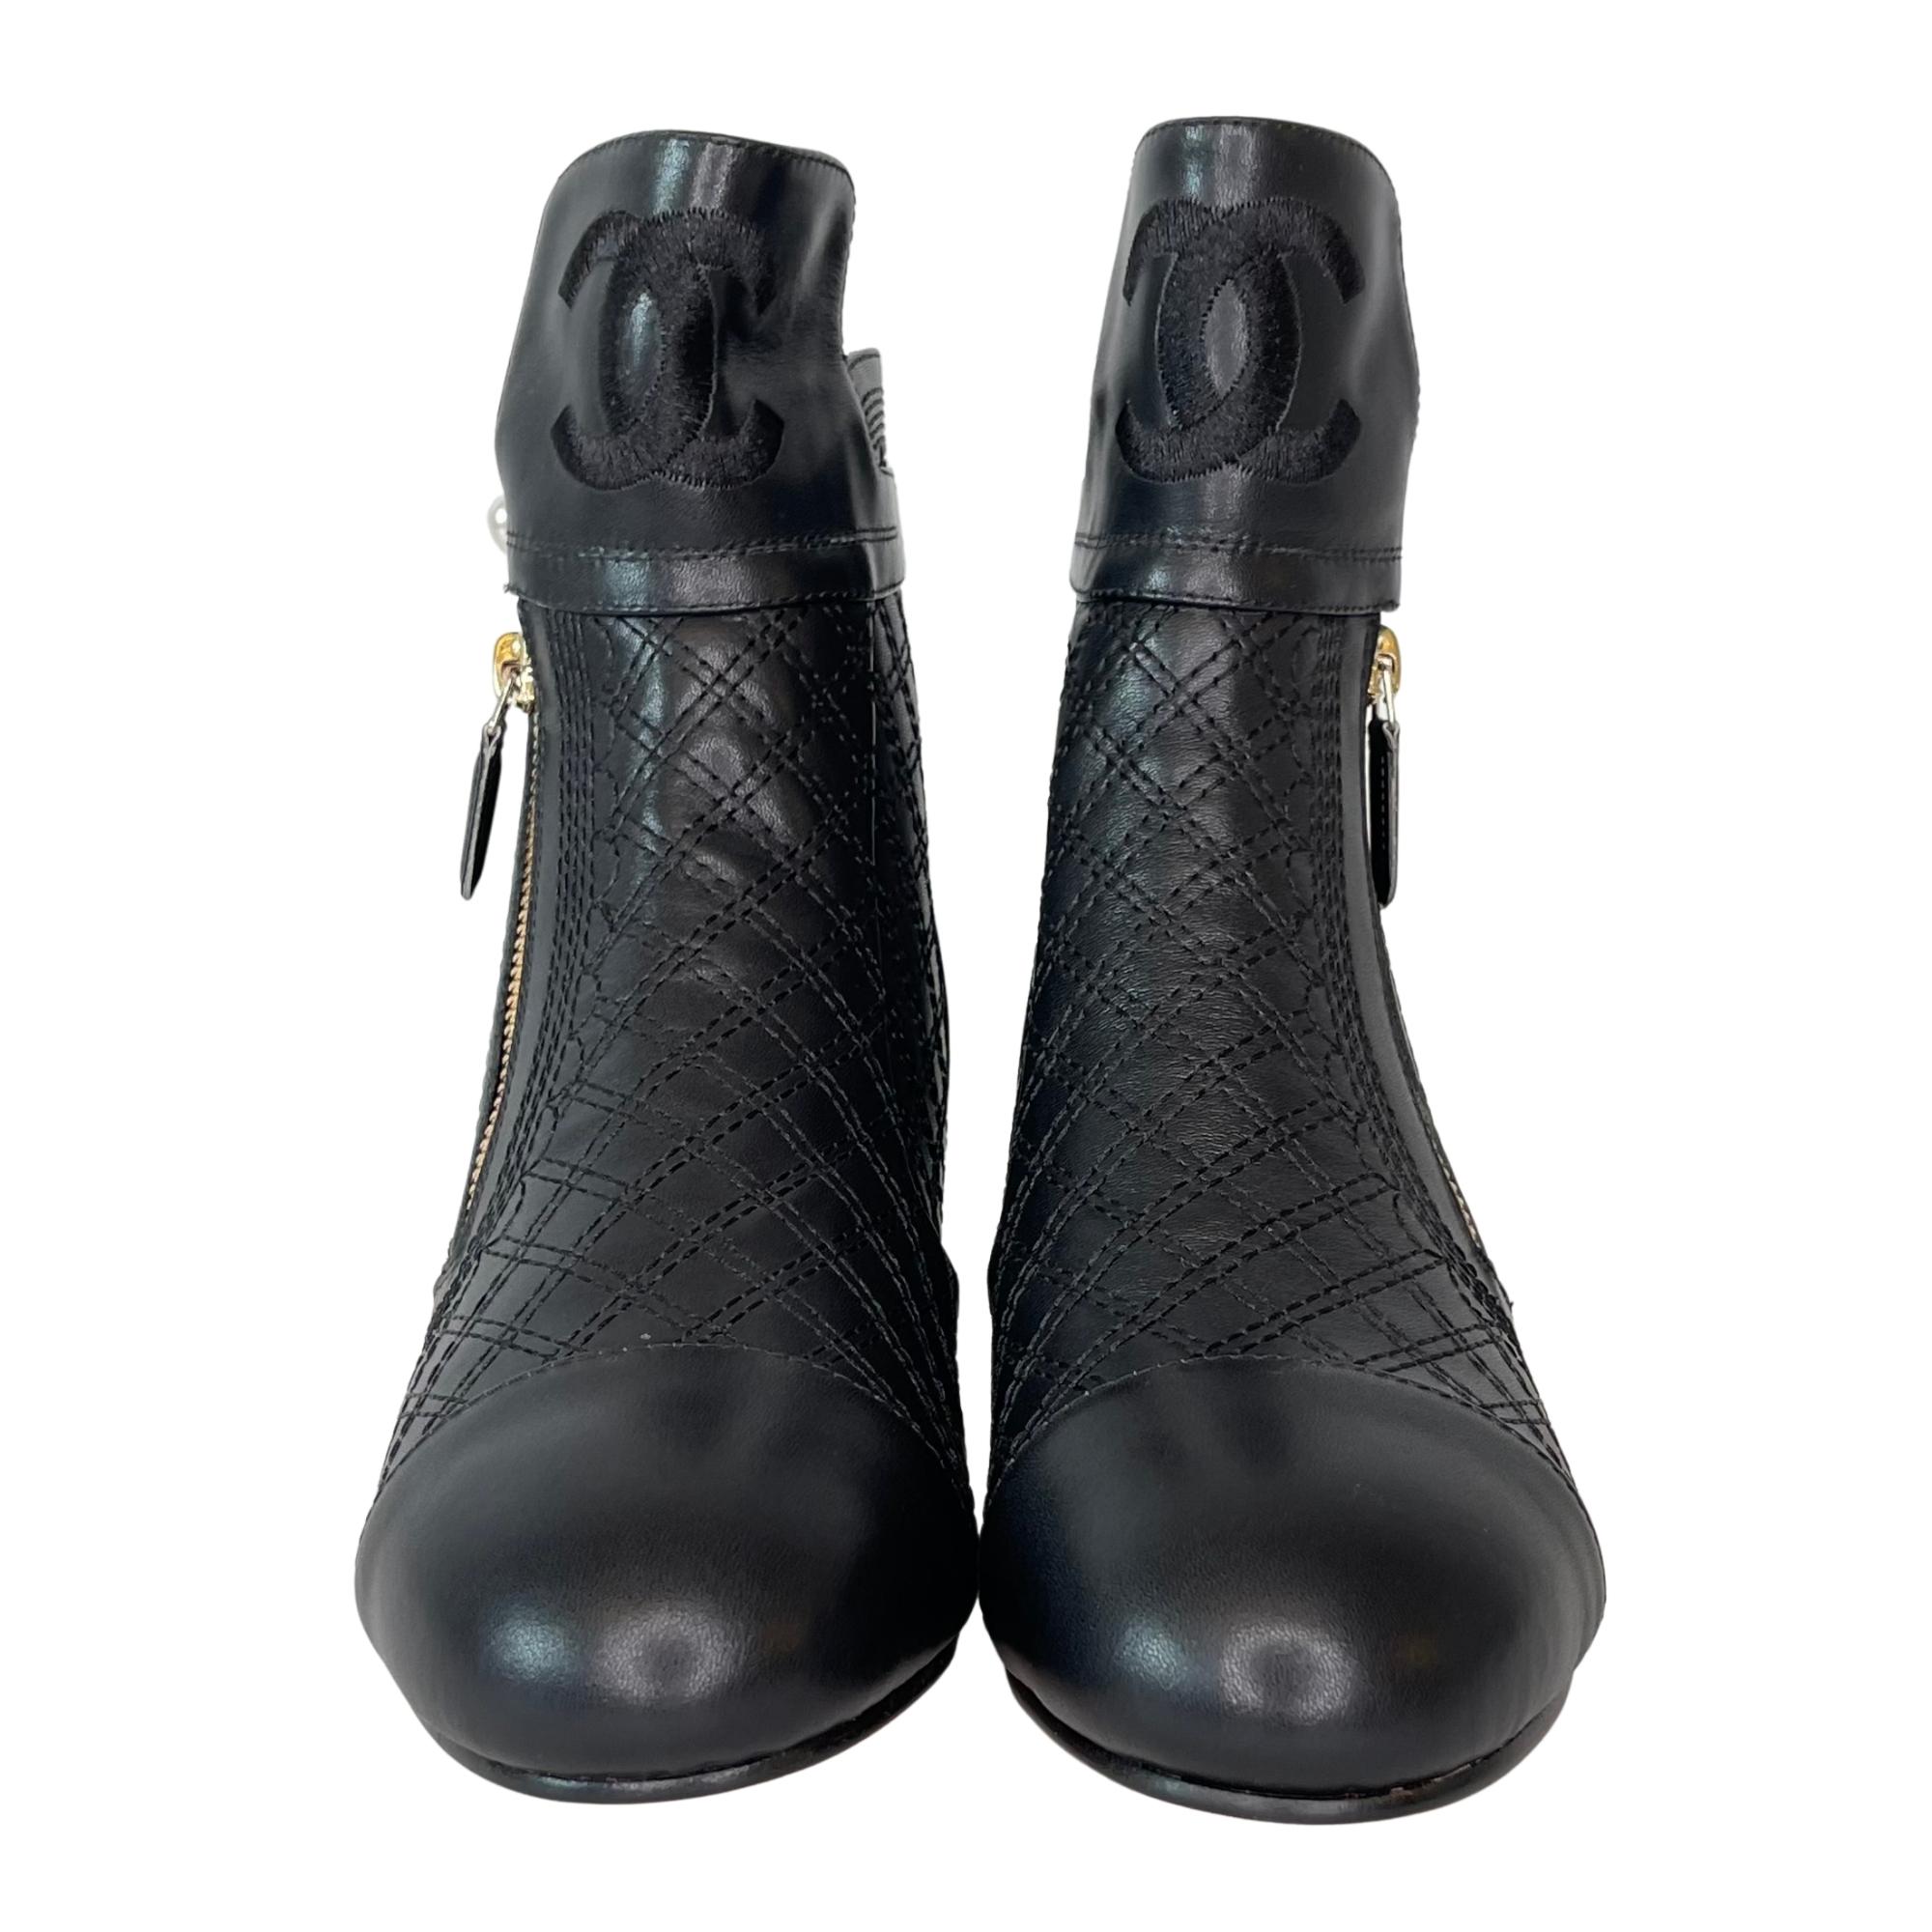 COLOR: Black
MATERIAL: Leather
SIZE: 39 C EU / 8 US
CONDITION: Very good - like new boots are pristine.

Made in Italy